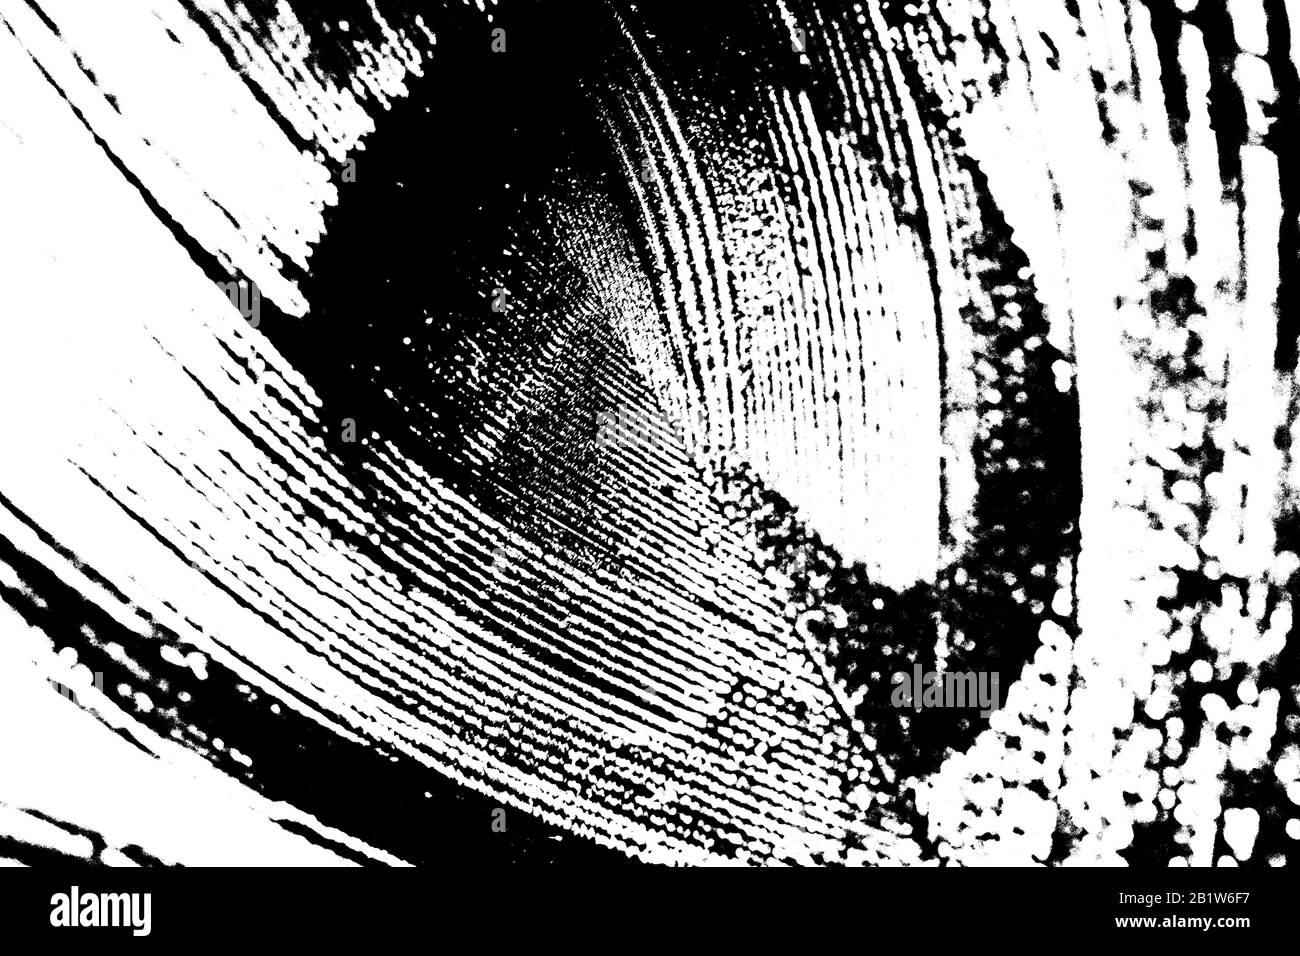 Black and white simple illustration of a Peacock eye. Stock Photo